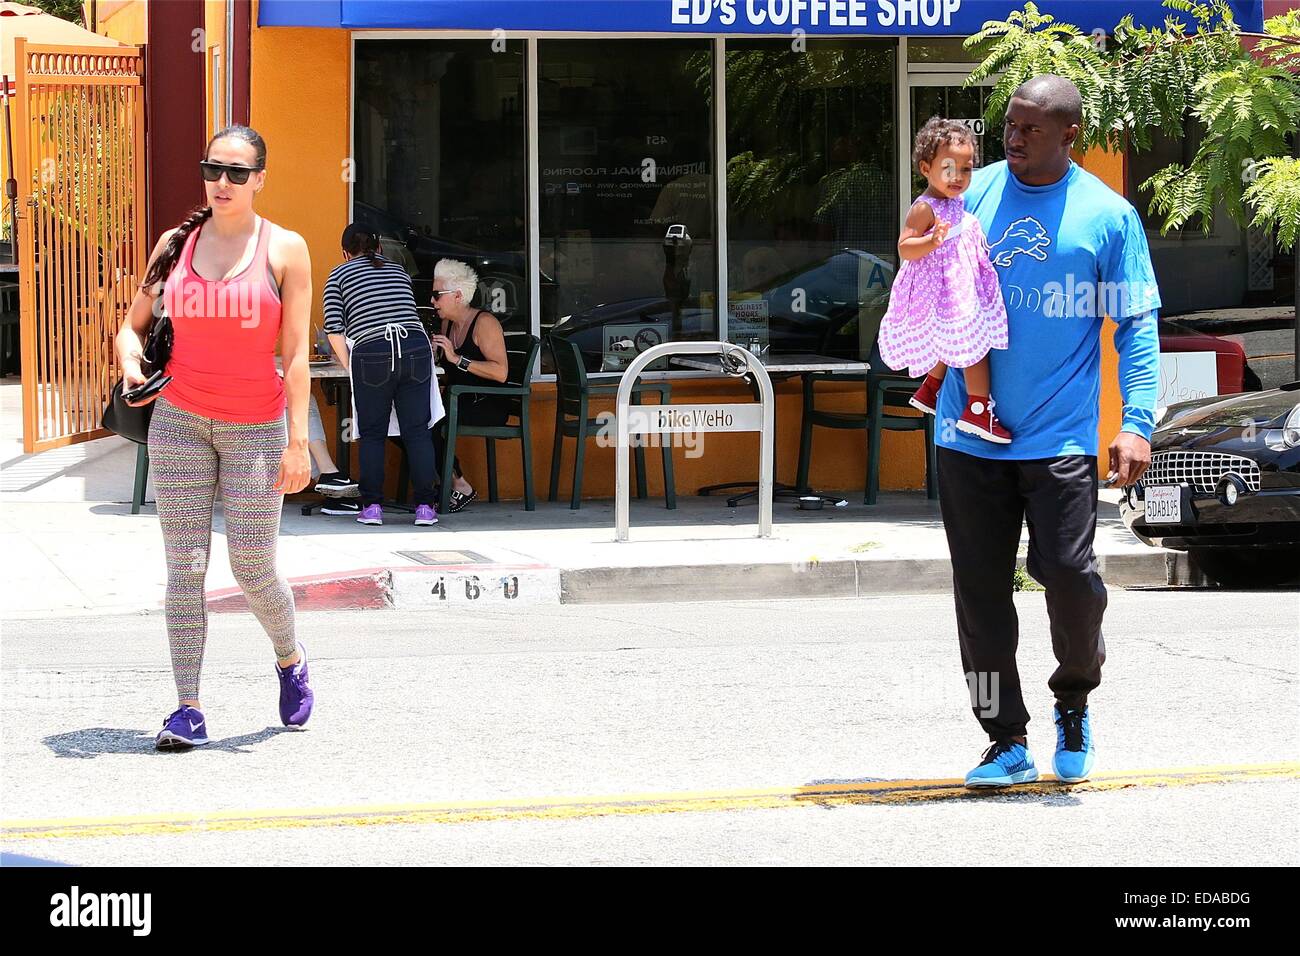 Reggie Bush with his wife Lilit Avagyan and baby daughter Briseis leave a restaurant cafe after having breakfast  Featuring: Briseis Bush,Reggie Bush,Lilit Avagyan Where: Los Angeles, California, United States When: 01 Jul 2014 Stock Photo